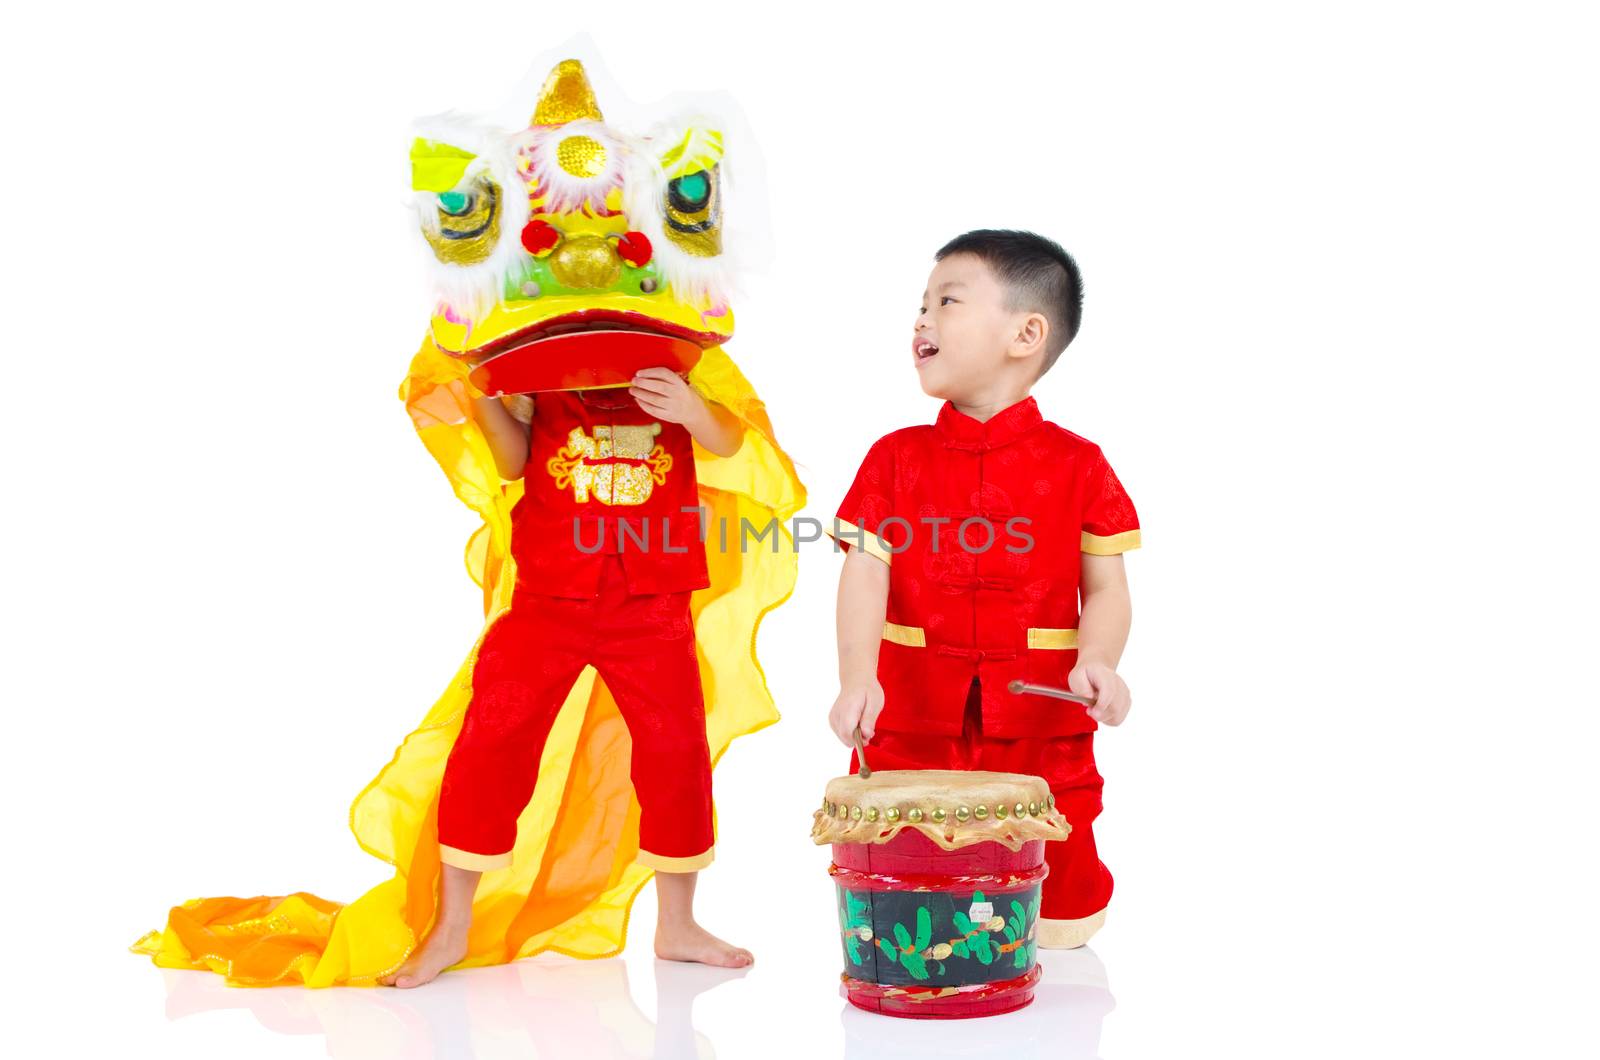 Asian Chinese kids in traditional Chinese cheongsam celebrating chinese new year , isolated on white background.